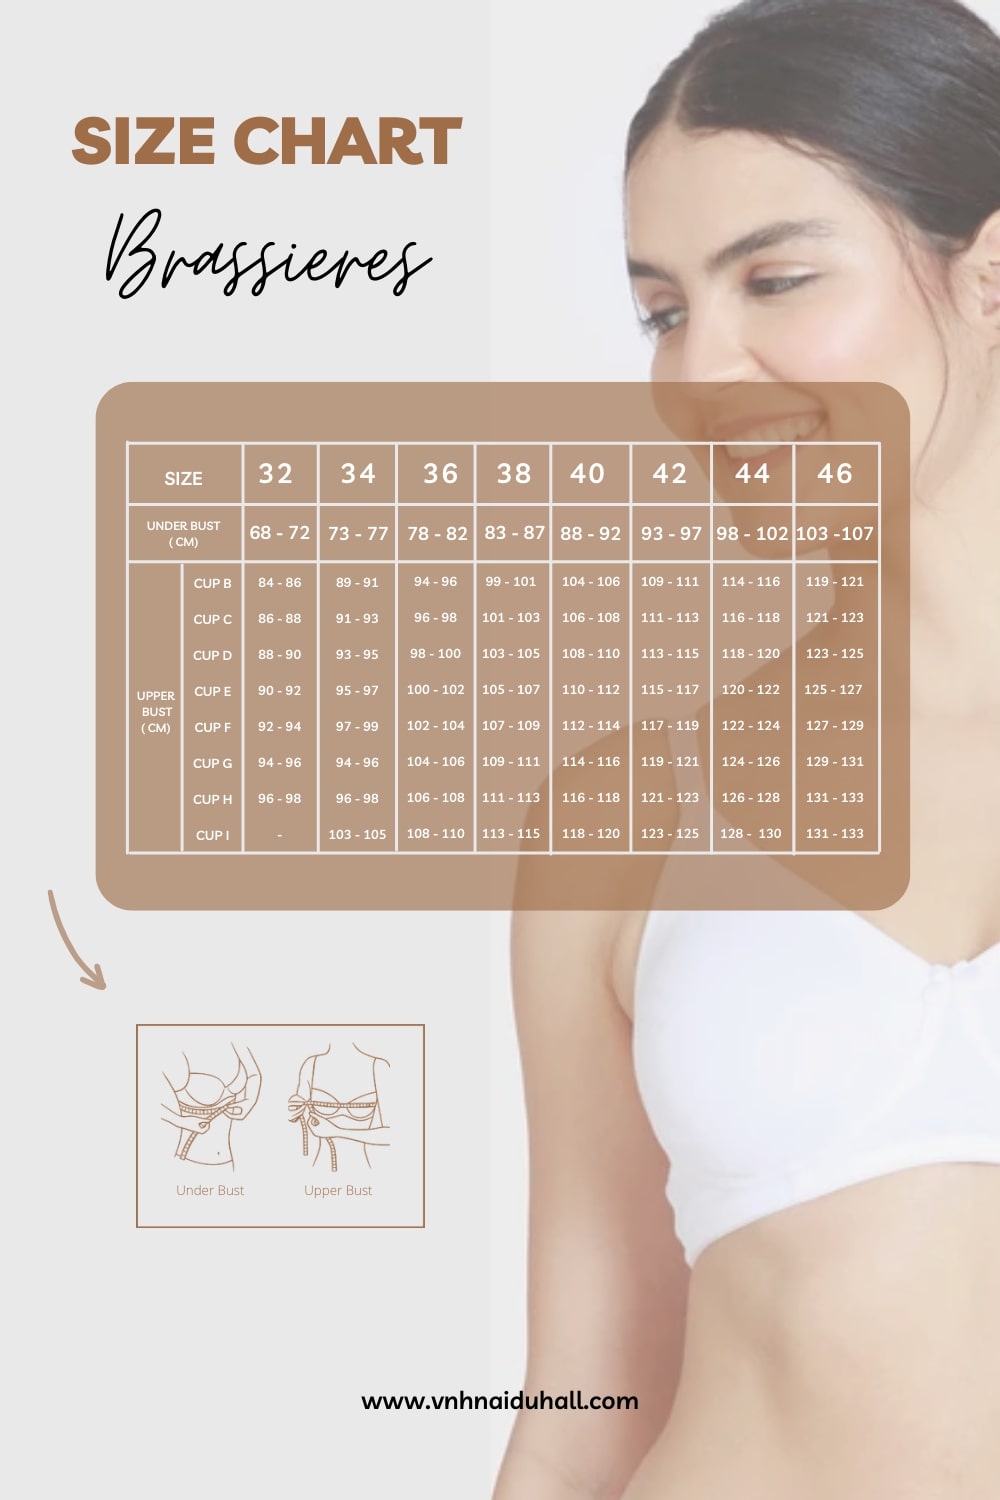 Intimacy Full Support Bra - DEFC - Must Have Pack